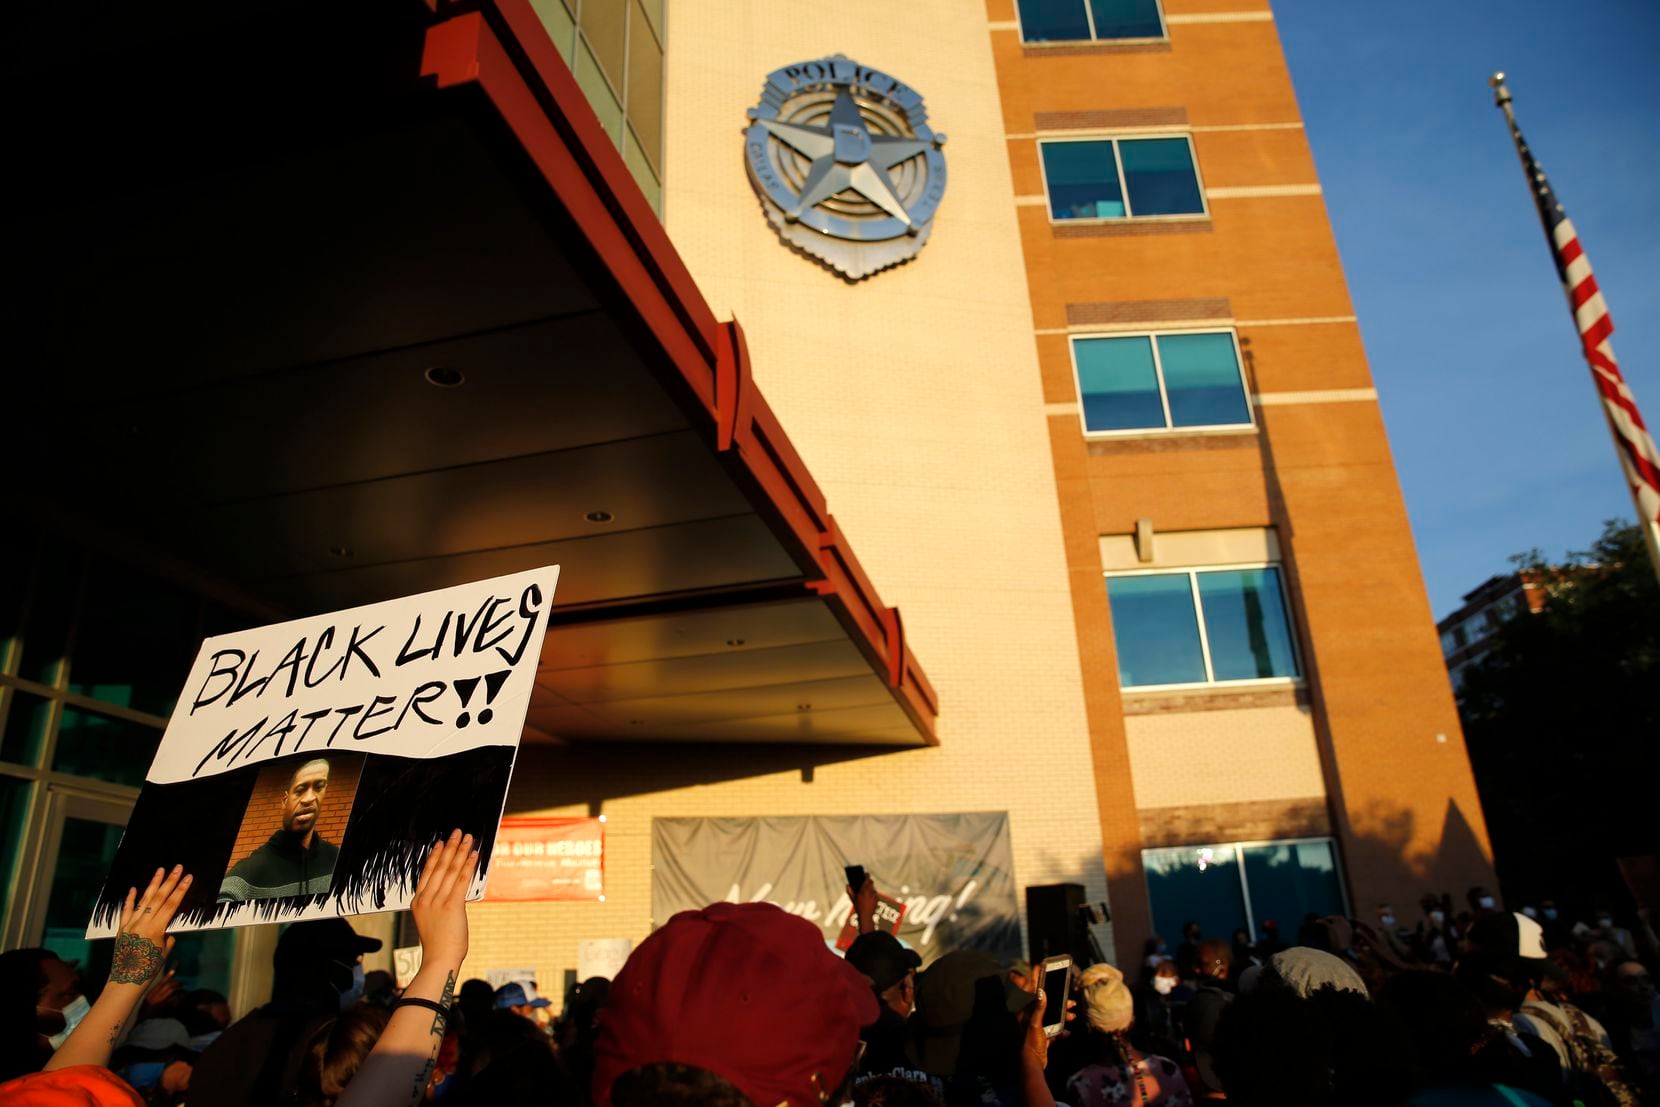 Protesters rally during a demonstration against police brutality in front of Dallas Police Department headquarters in downtown Dallas, on Friday, May 29, 2020. Despite calls from some to defund the police, the new city budget does not call for any major reductions in police funding, aside from $7 million in overtime.